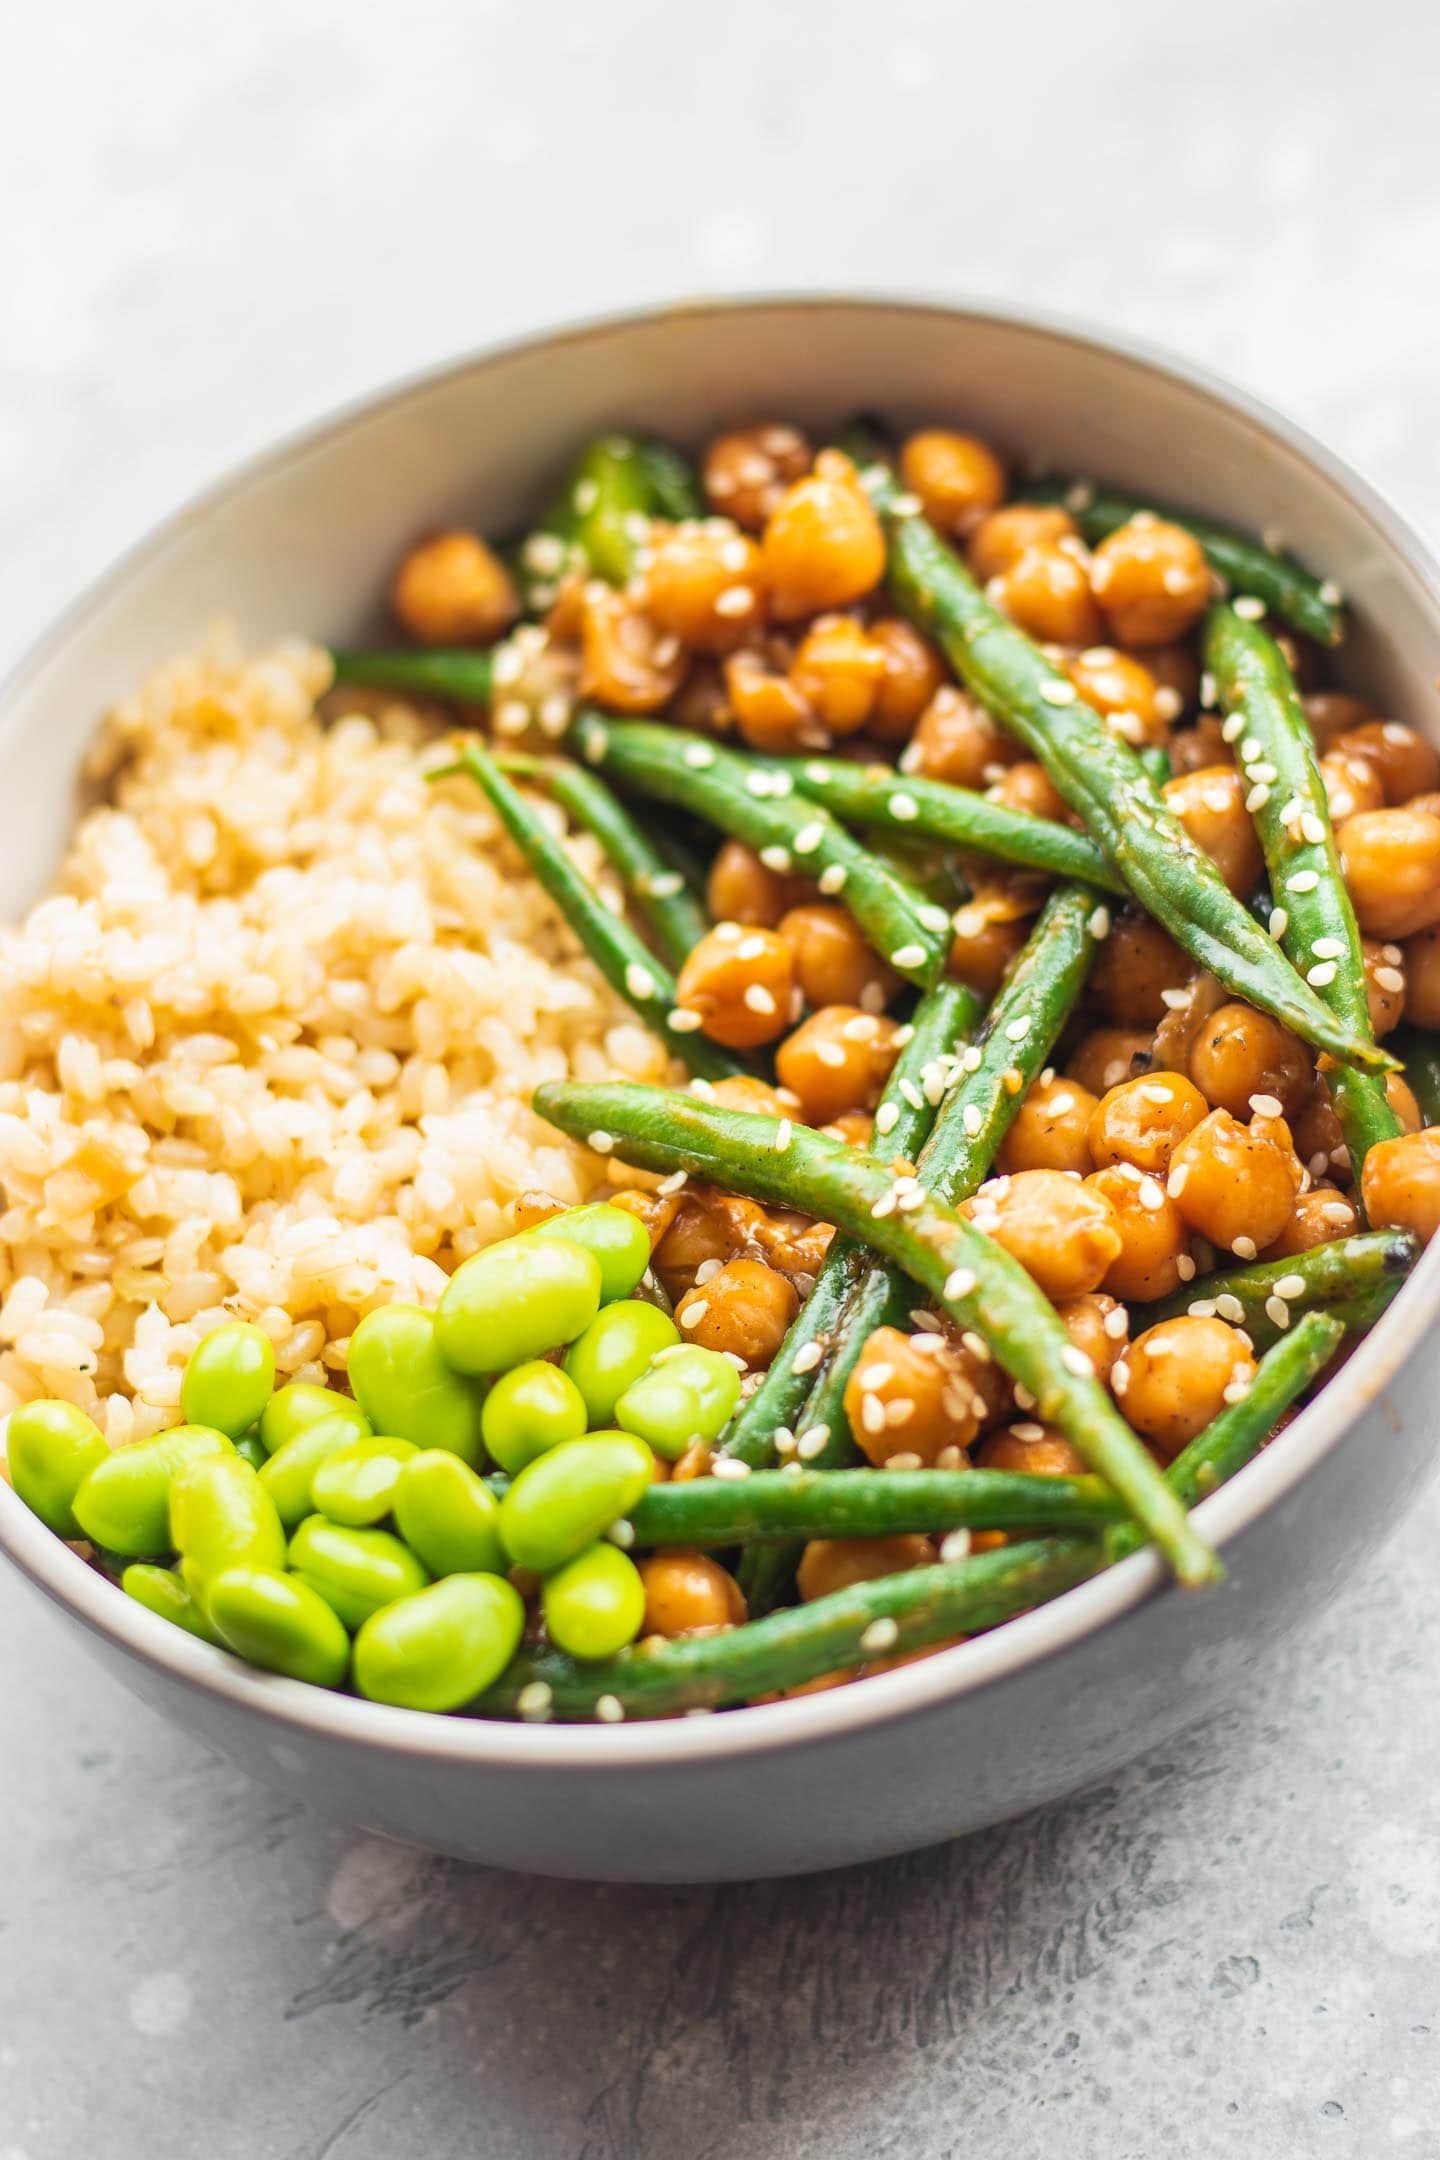 Bowl with sweet and sour chickpeas, green beans and edamame